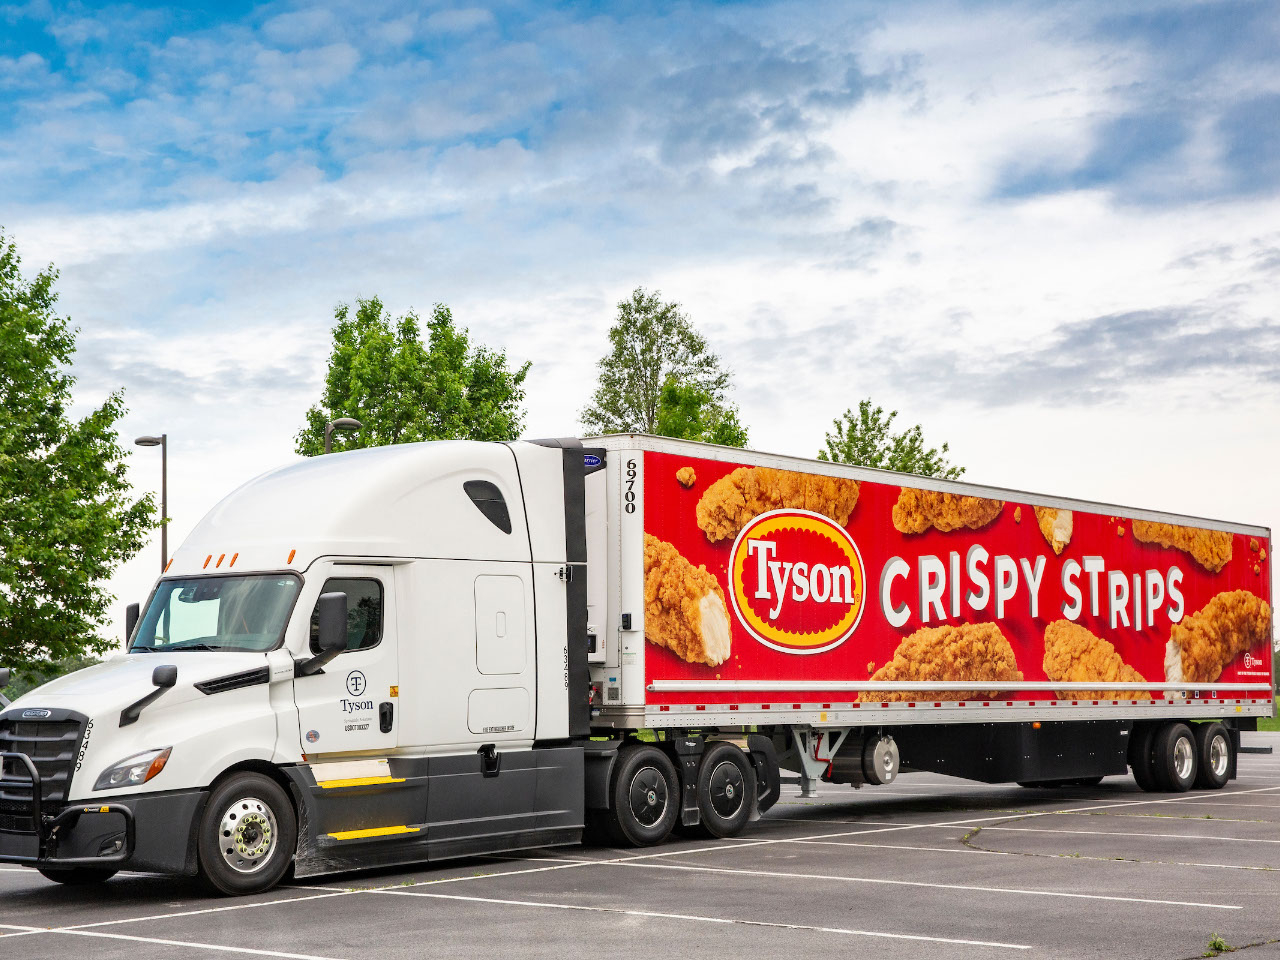 This is a photo of a Tyson Chicken Strips truck